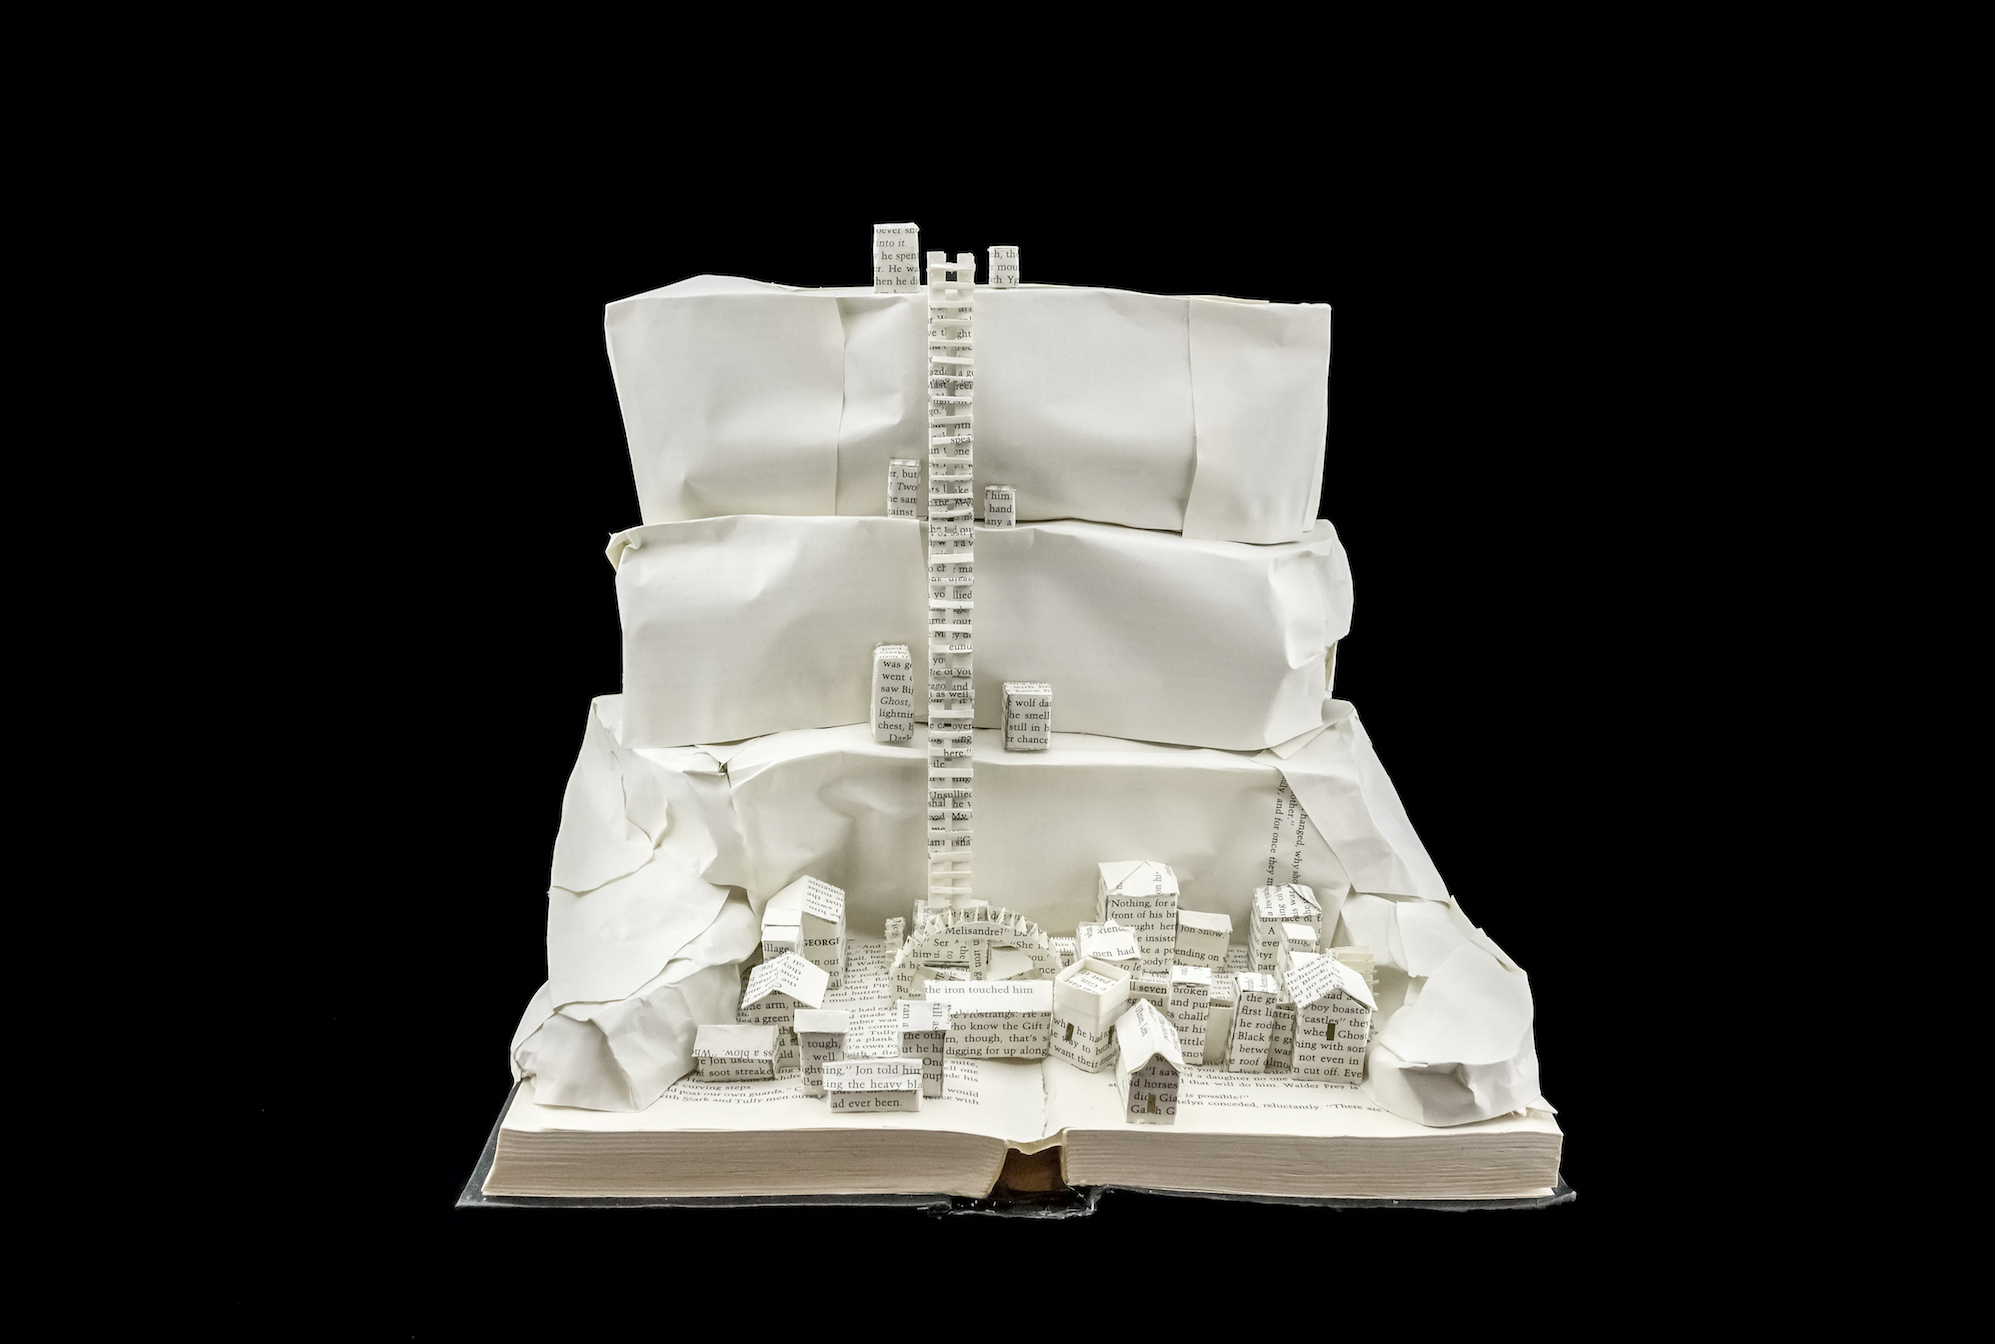 Game of Thrones The Wall and Castle Black Book Sculpture